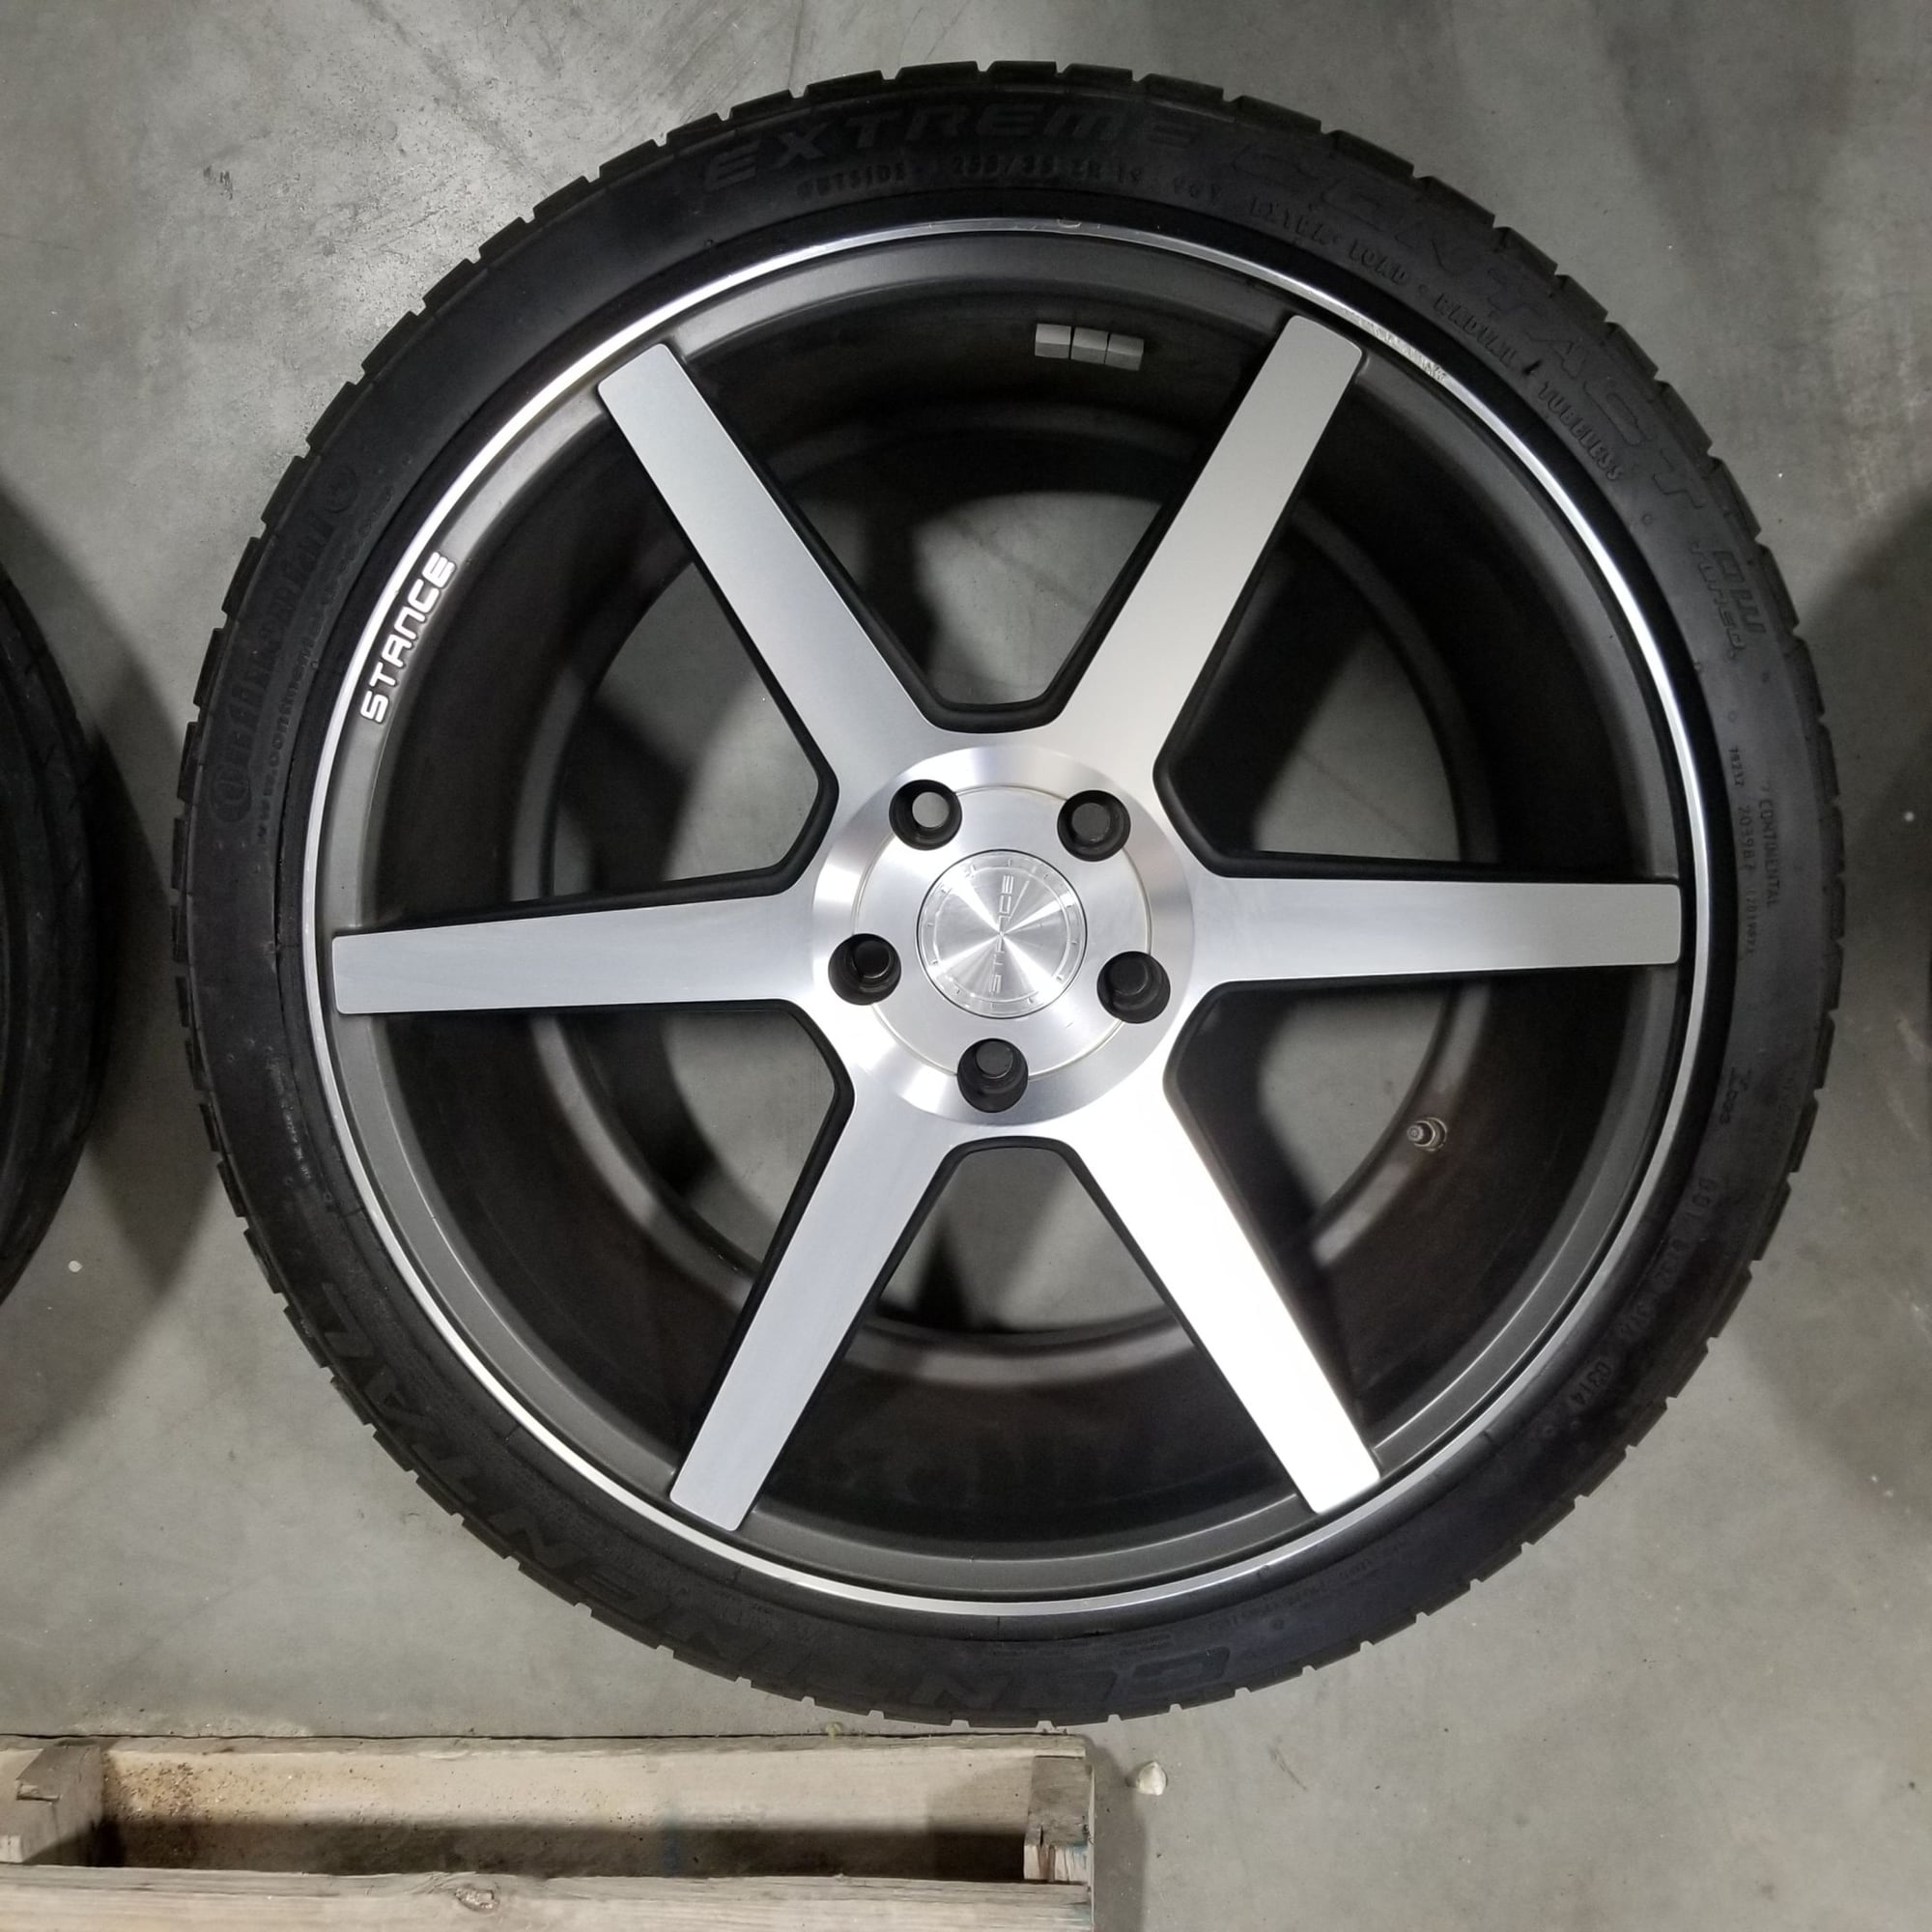 Wheels and Tires/Axles - 19 inch Stance wheels SC6 staggered wheels set - Used - 2008 to 2014 Lexus IS F - Houston, TX 77008, United States